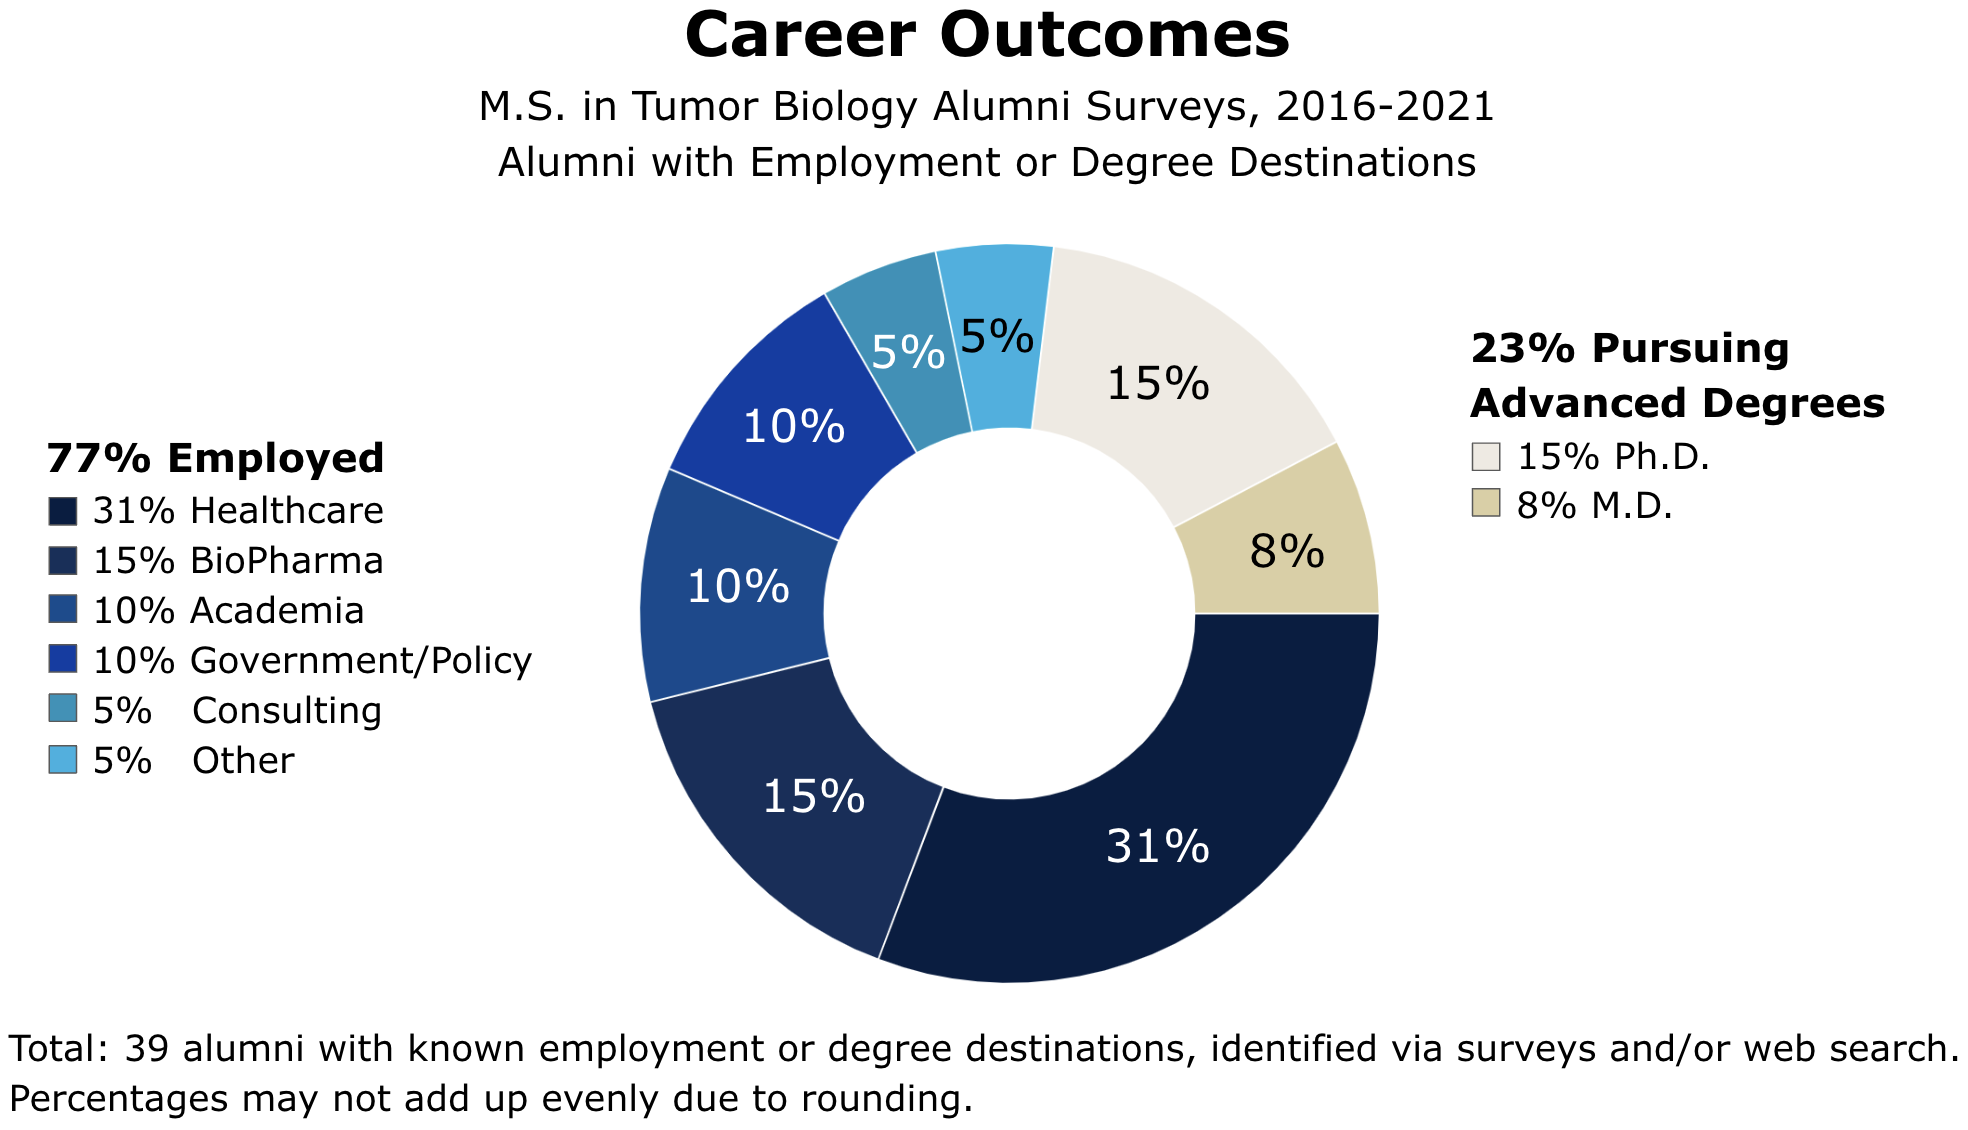 A chart of MS-TBIO alumni 2016-2021 with known employment or degree destinations, identified via surveys and/or web search. Of 39 alumni, 77% were employed: 31% in Healthcare, 15% in BioPharma, 10% in Academia, 10% in Government/Policy, 5% in Consulting, 5% Other. 23% were pursuing advanced degrees: 15% Ph.D., 8% M.D.